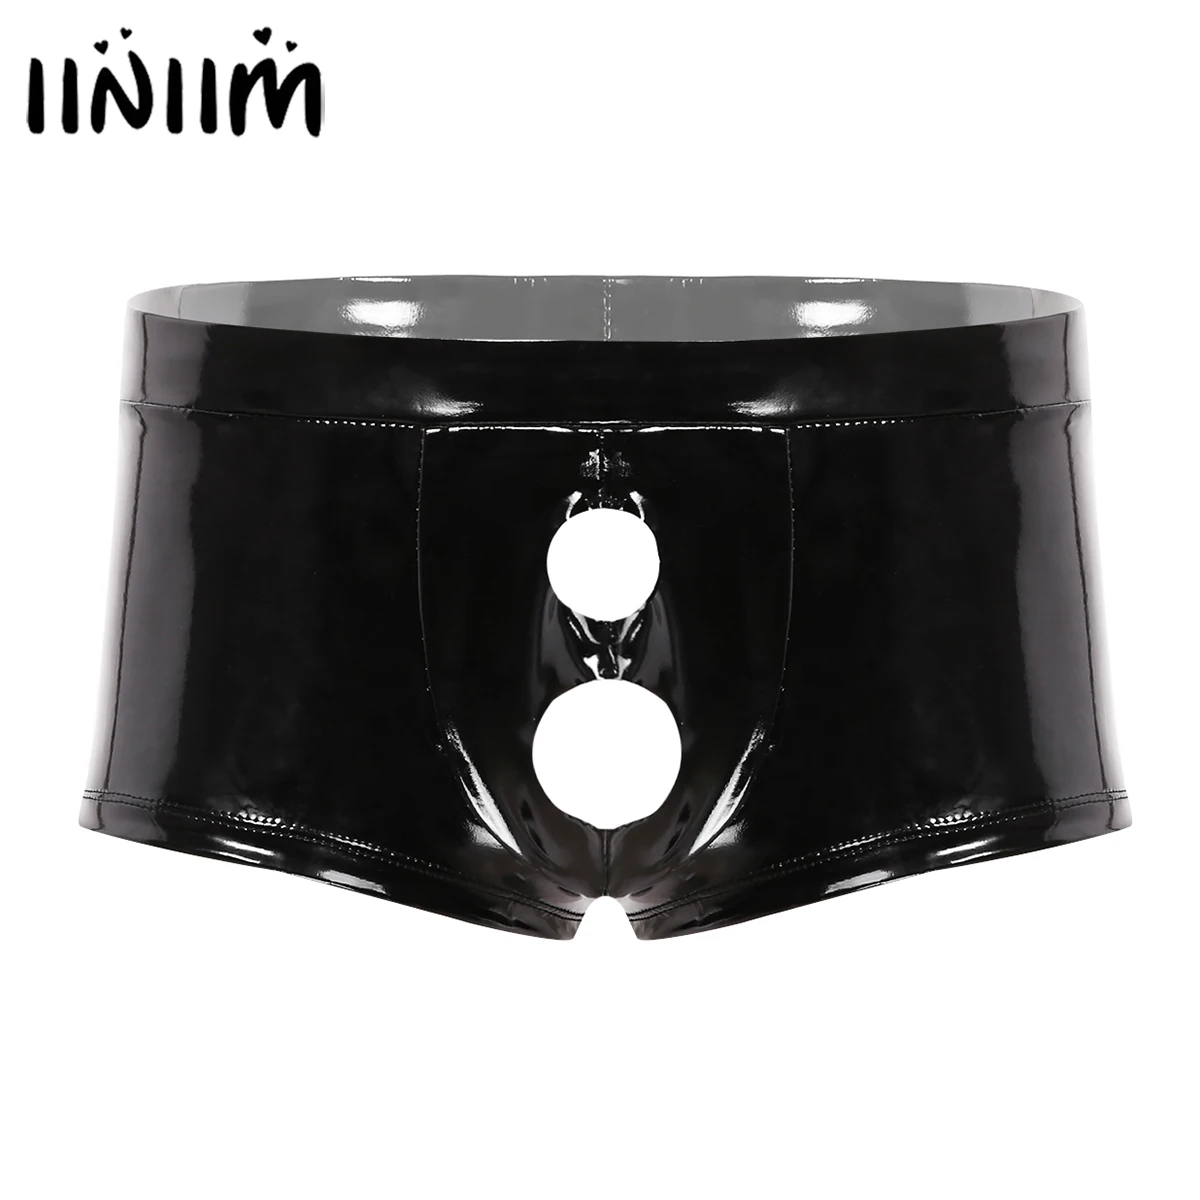 

iiniim Mens Wet Look Gay Underwear Panties Patent Leather Lingerie Underpant Low Rise Bulge Pouch with Holes Boxer Briefs Shorts